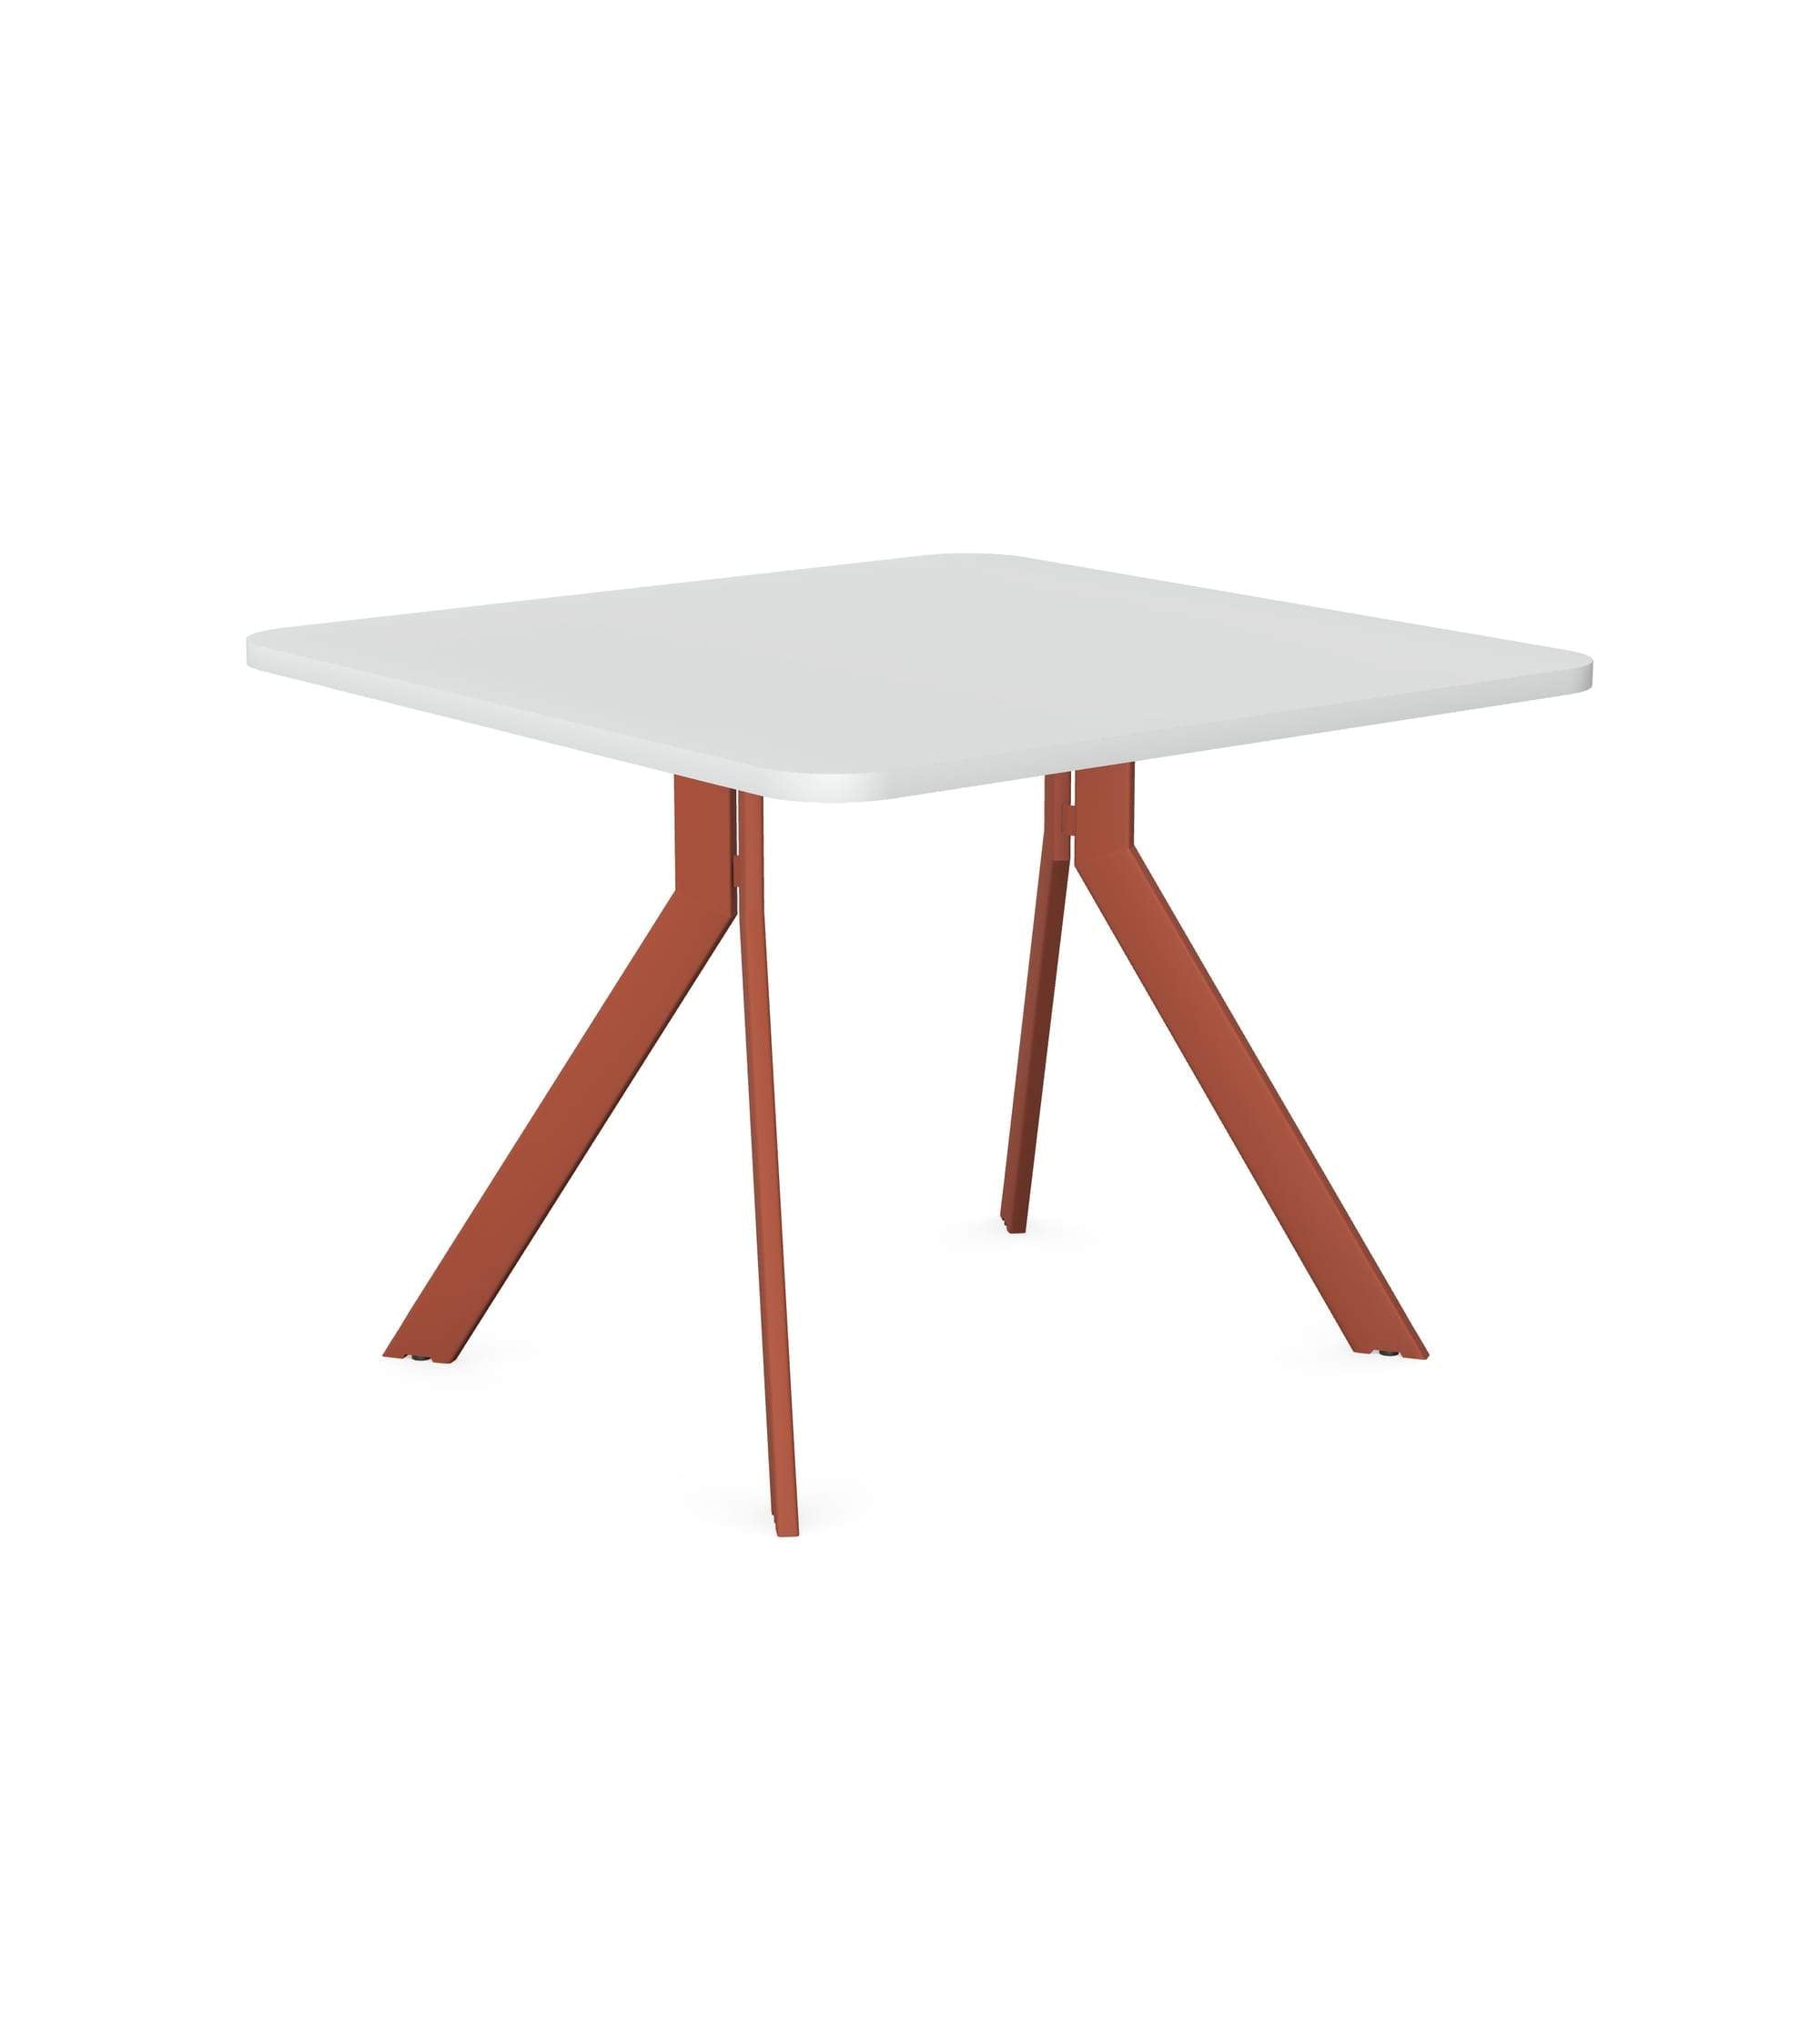 Axy-Line - Occasional Tables, Squared Tops, Leg-Y